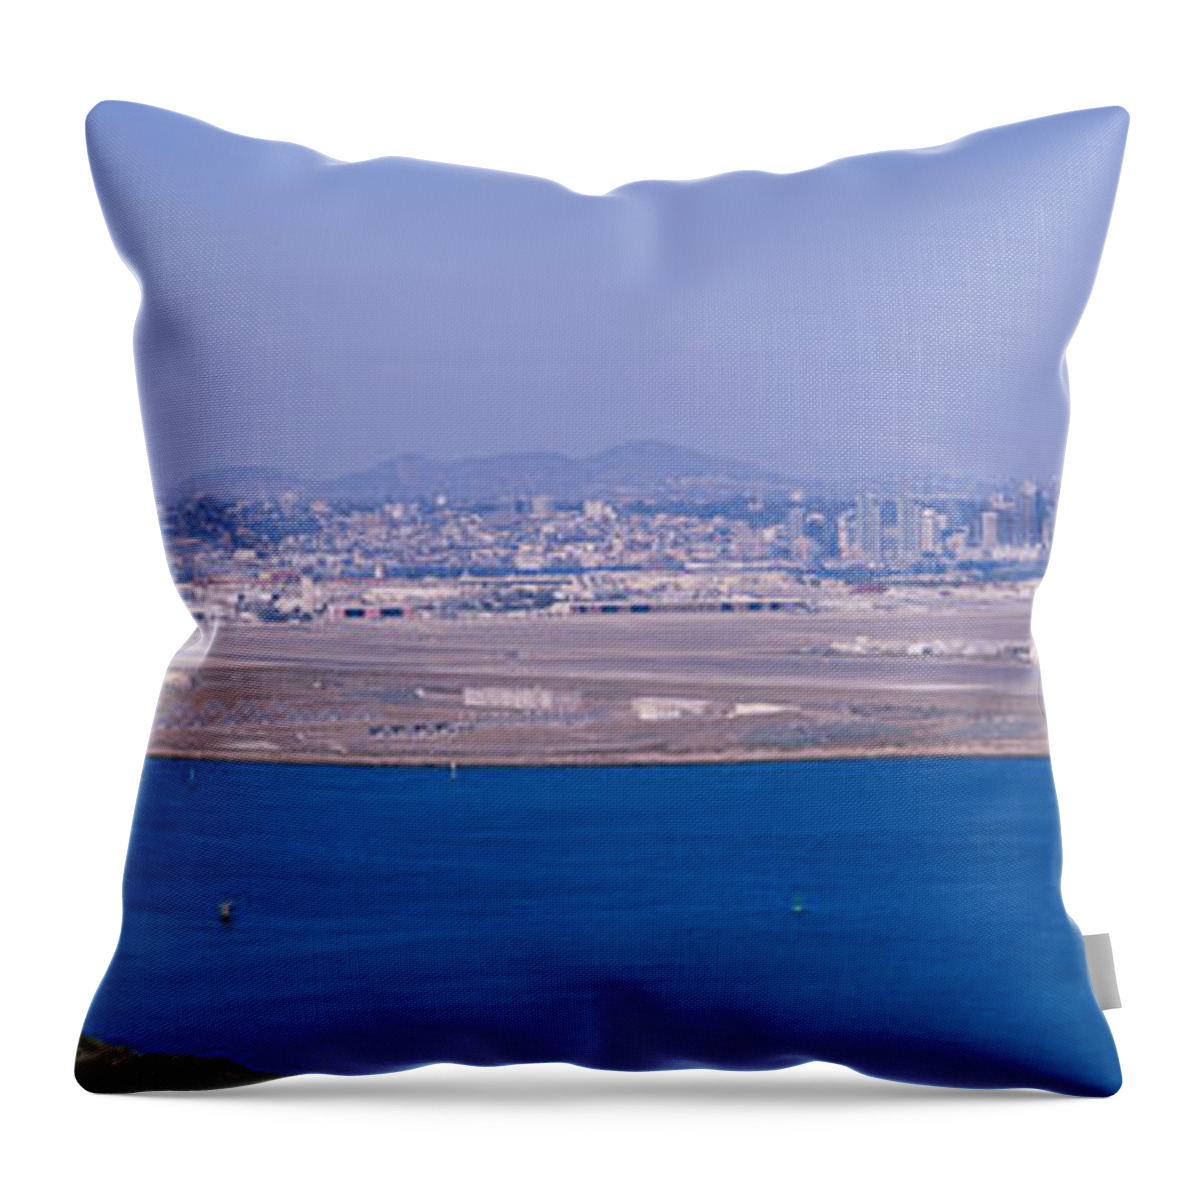 Photography Throw Pillow featuring the photograph High Angle View Of A Coastline by Panoramic Images